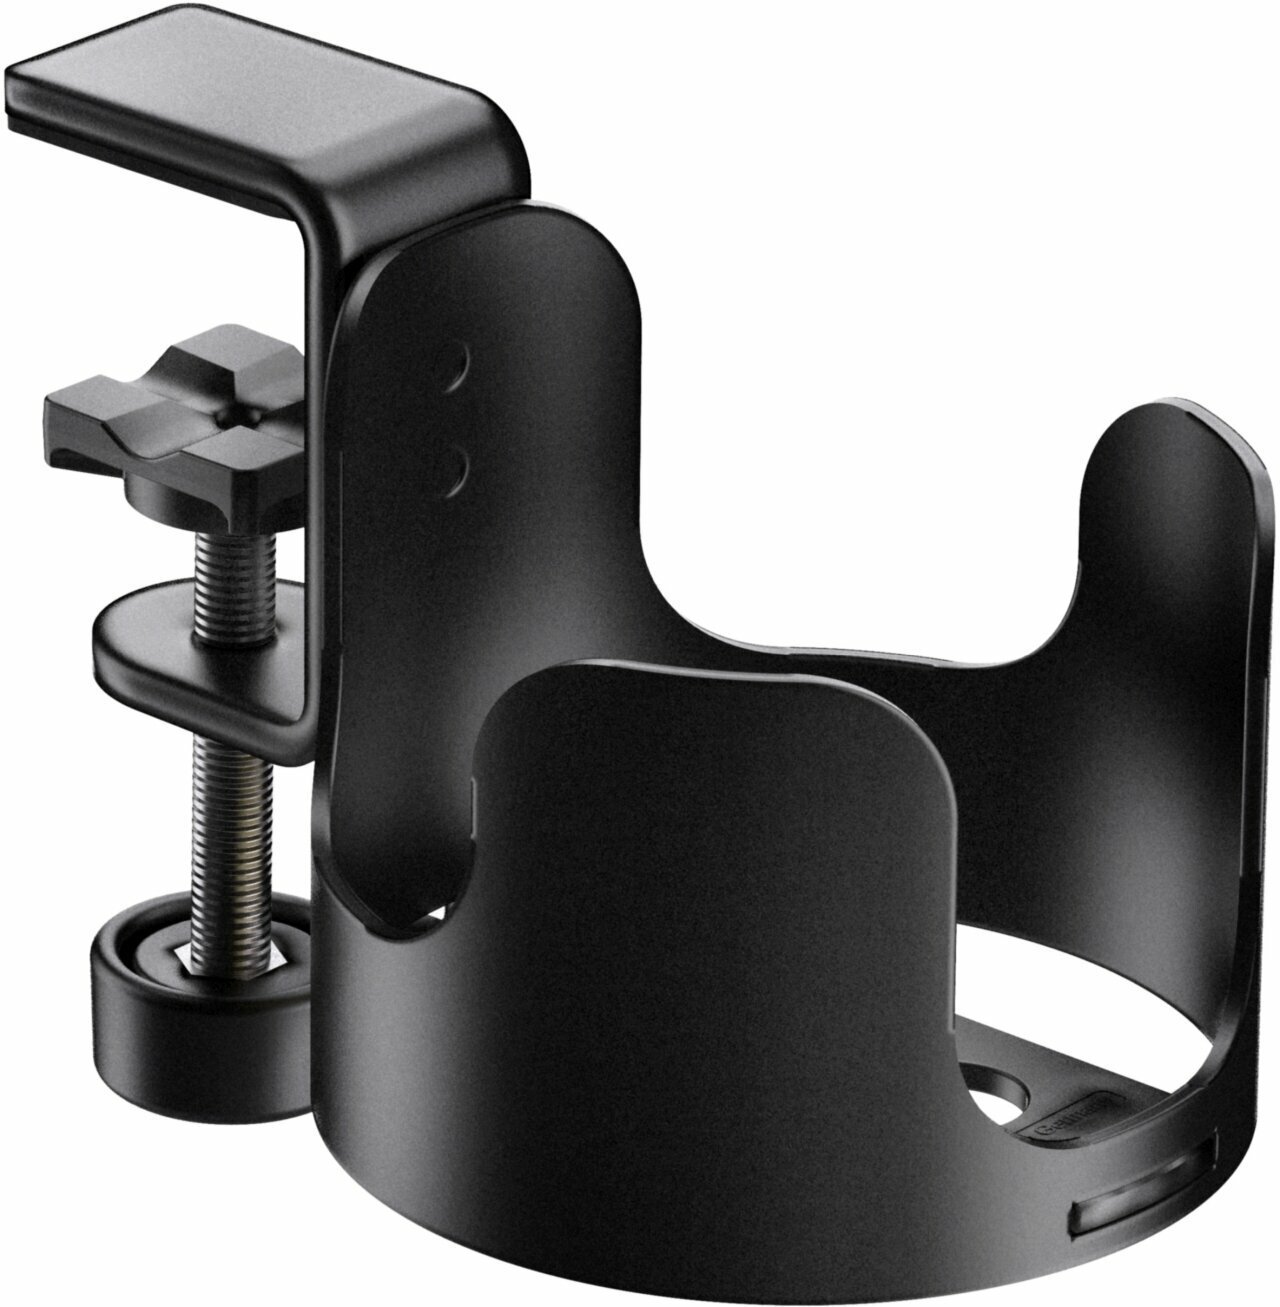 Accessory for microphone stand Konig & Meyer 16019 Accessory for microphone stand